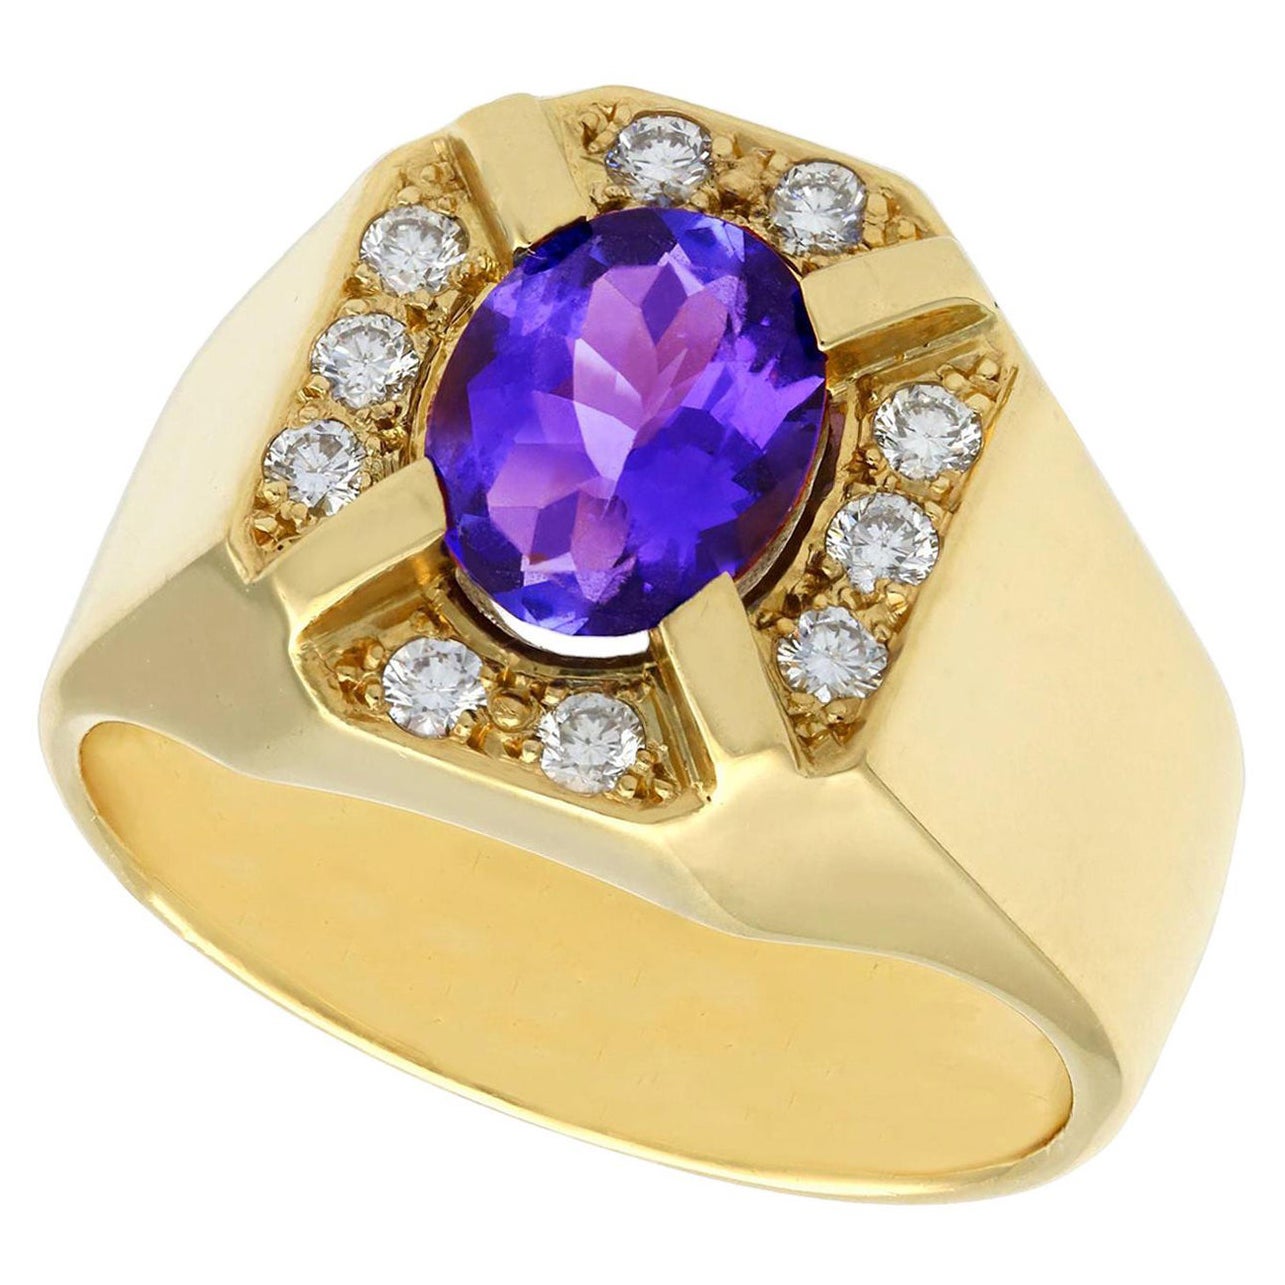 3.35 Carat Oval Cut Tanzanite and Diamond Yellow Gold Cocktail Ring